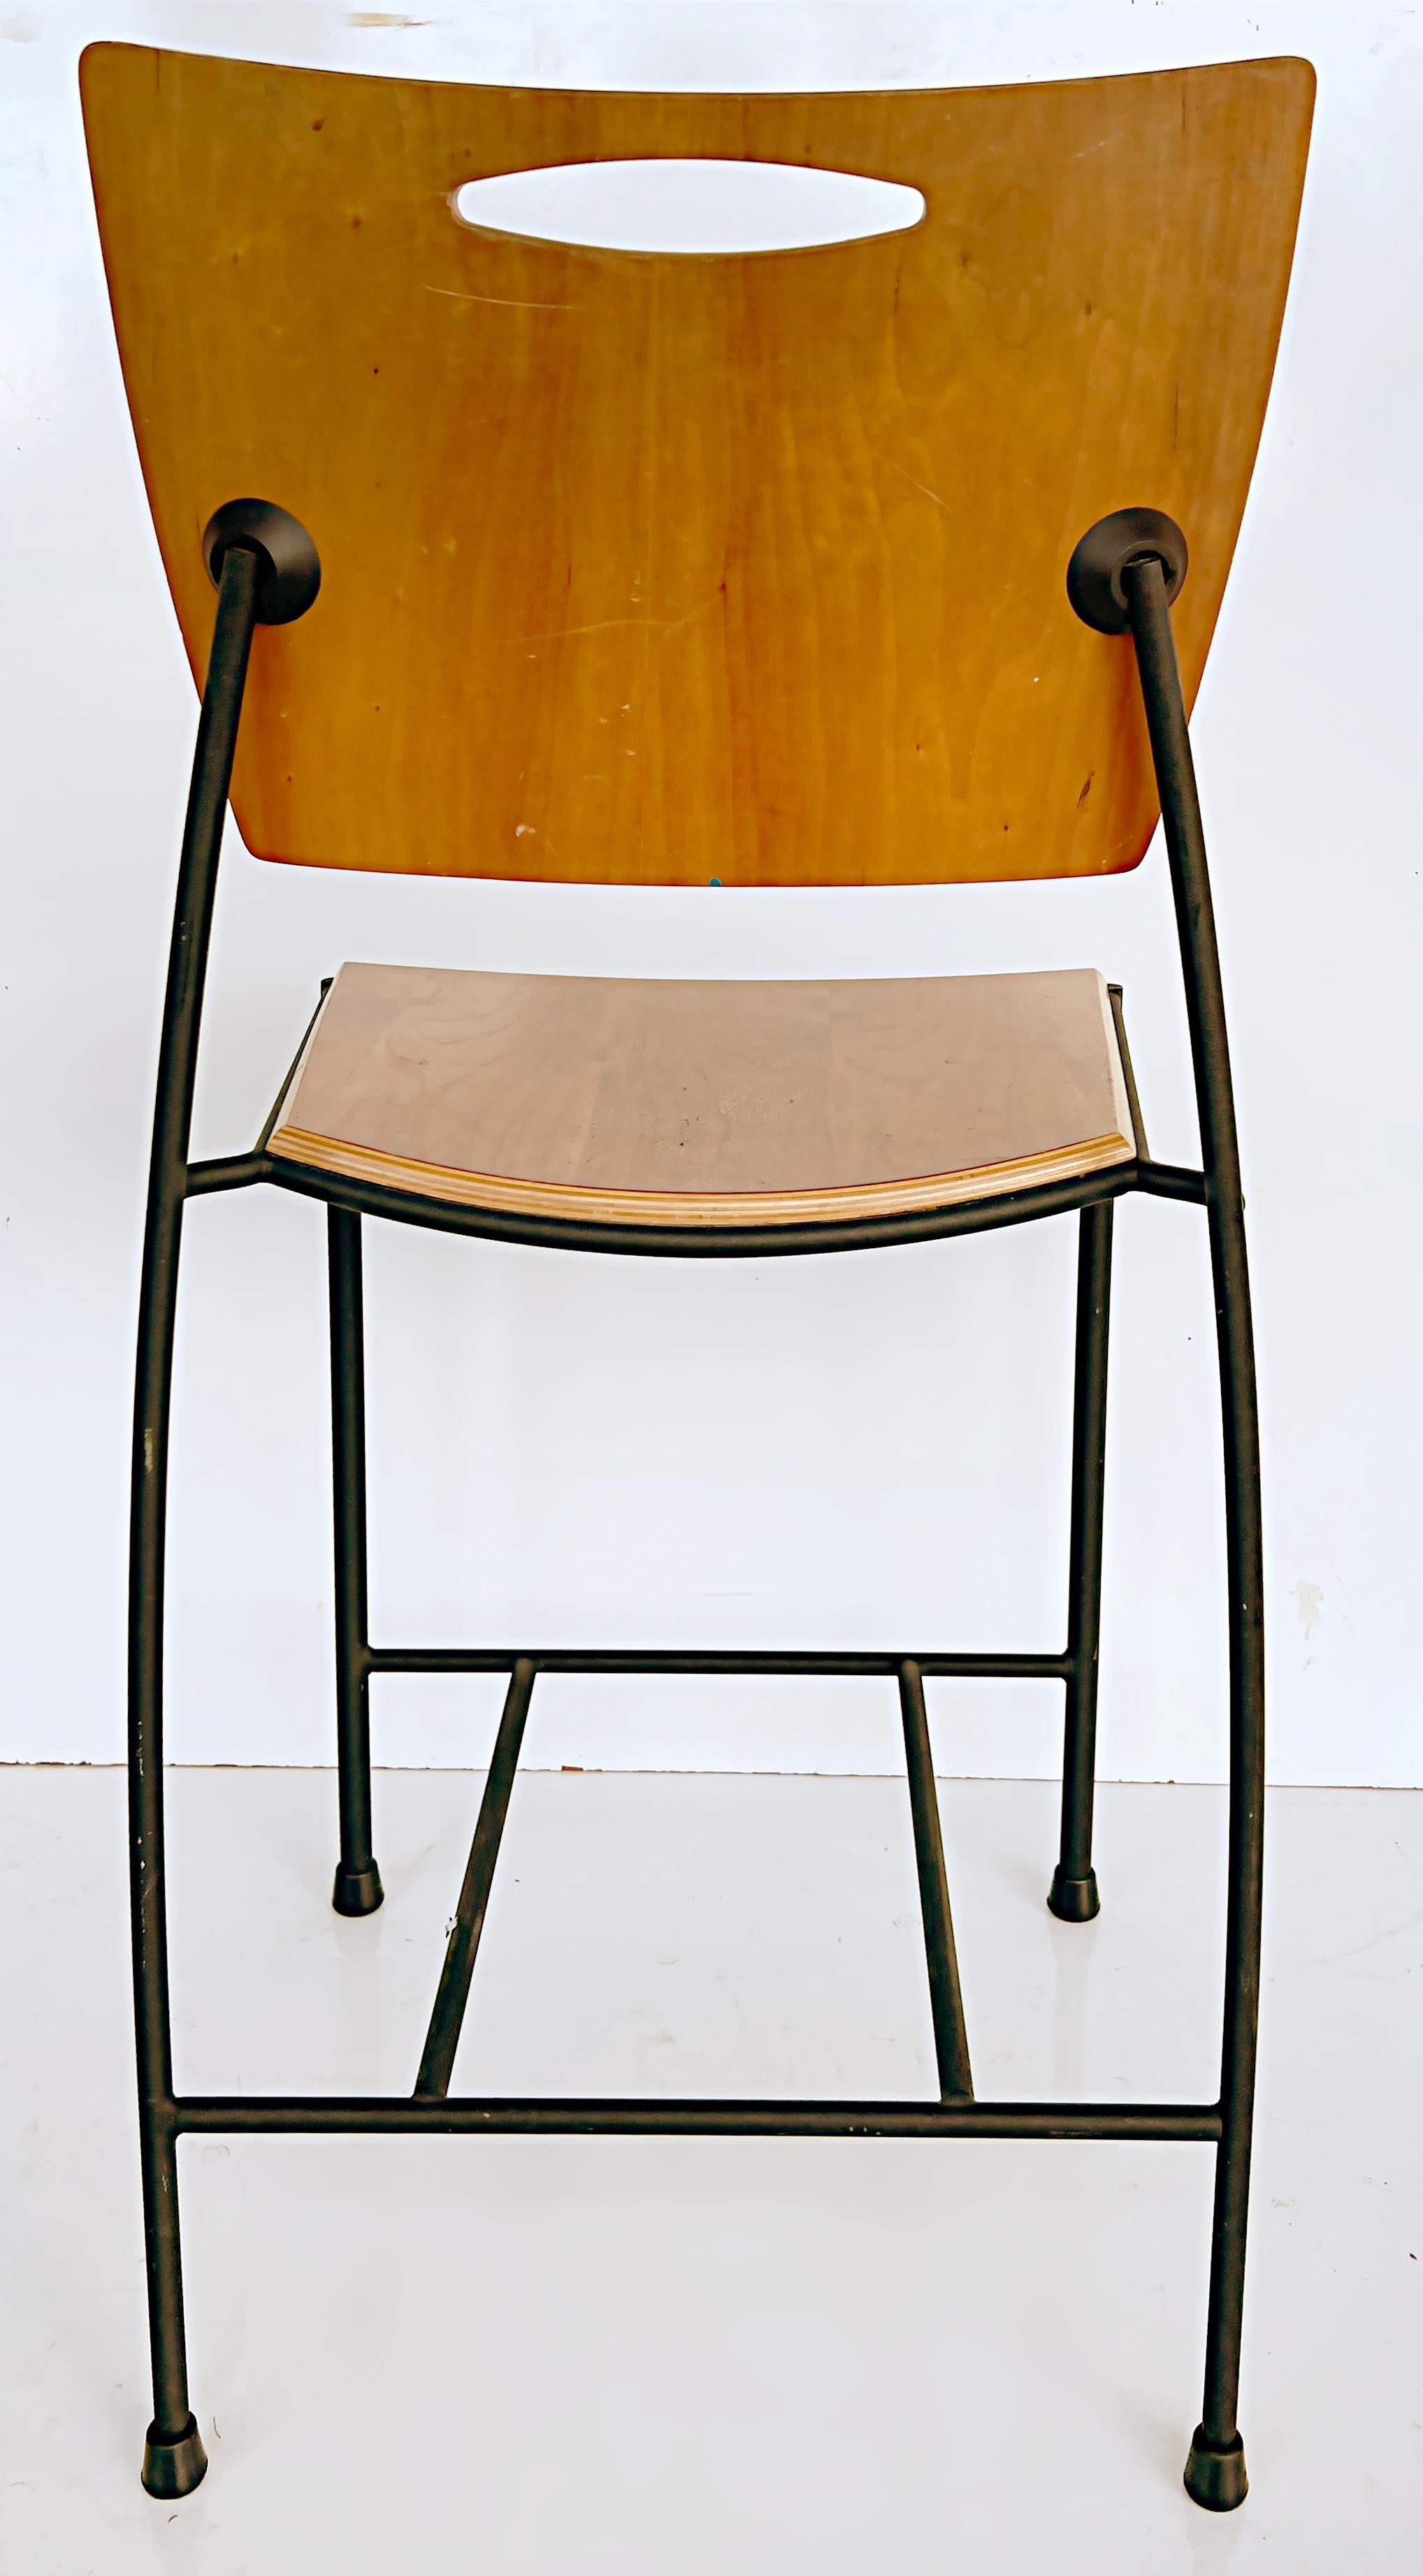 Vintage Dakota Jackson Postmodern wrought iron barstools, set of 3 

Offered for sale is a set of 3 vintage Dakota Jackson Postmodern counter height barstools. They are created in wrought iron with molded plywood seats and backs. The stools are